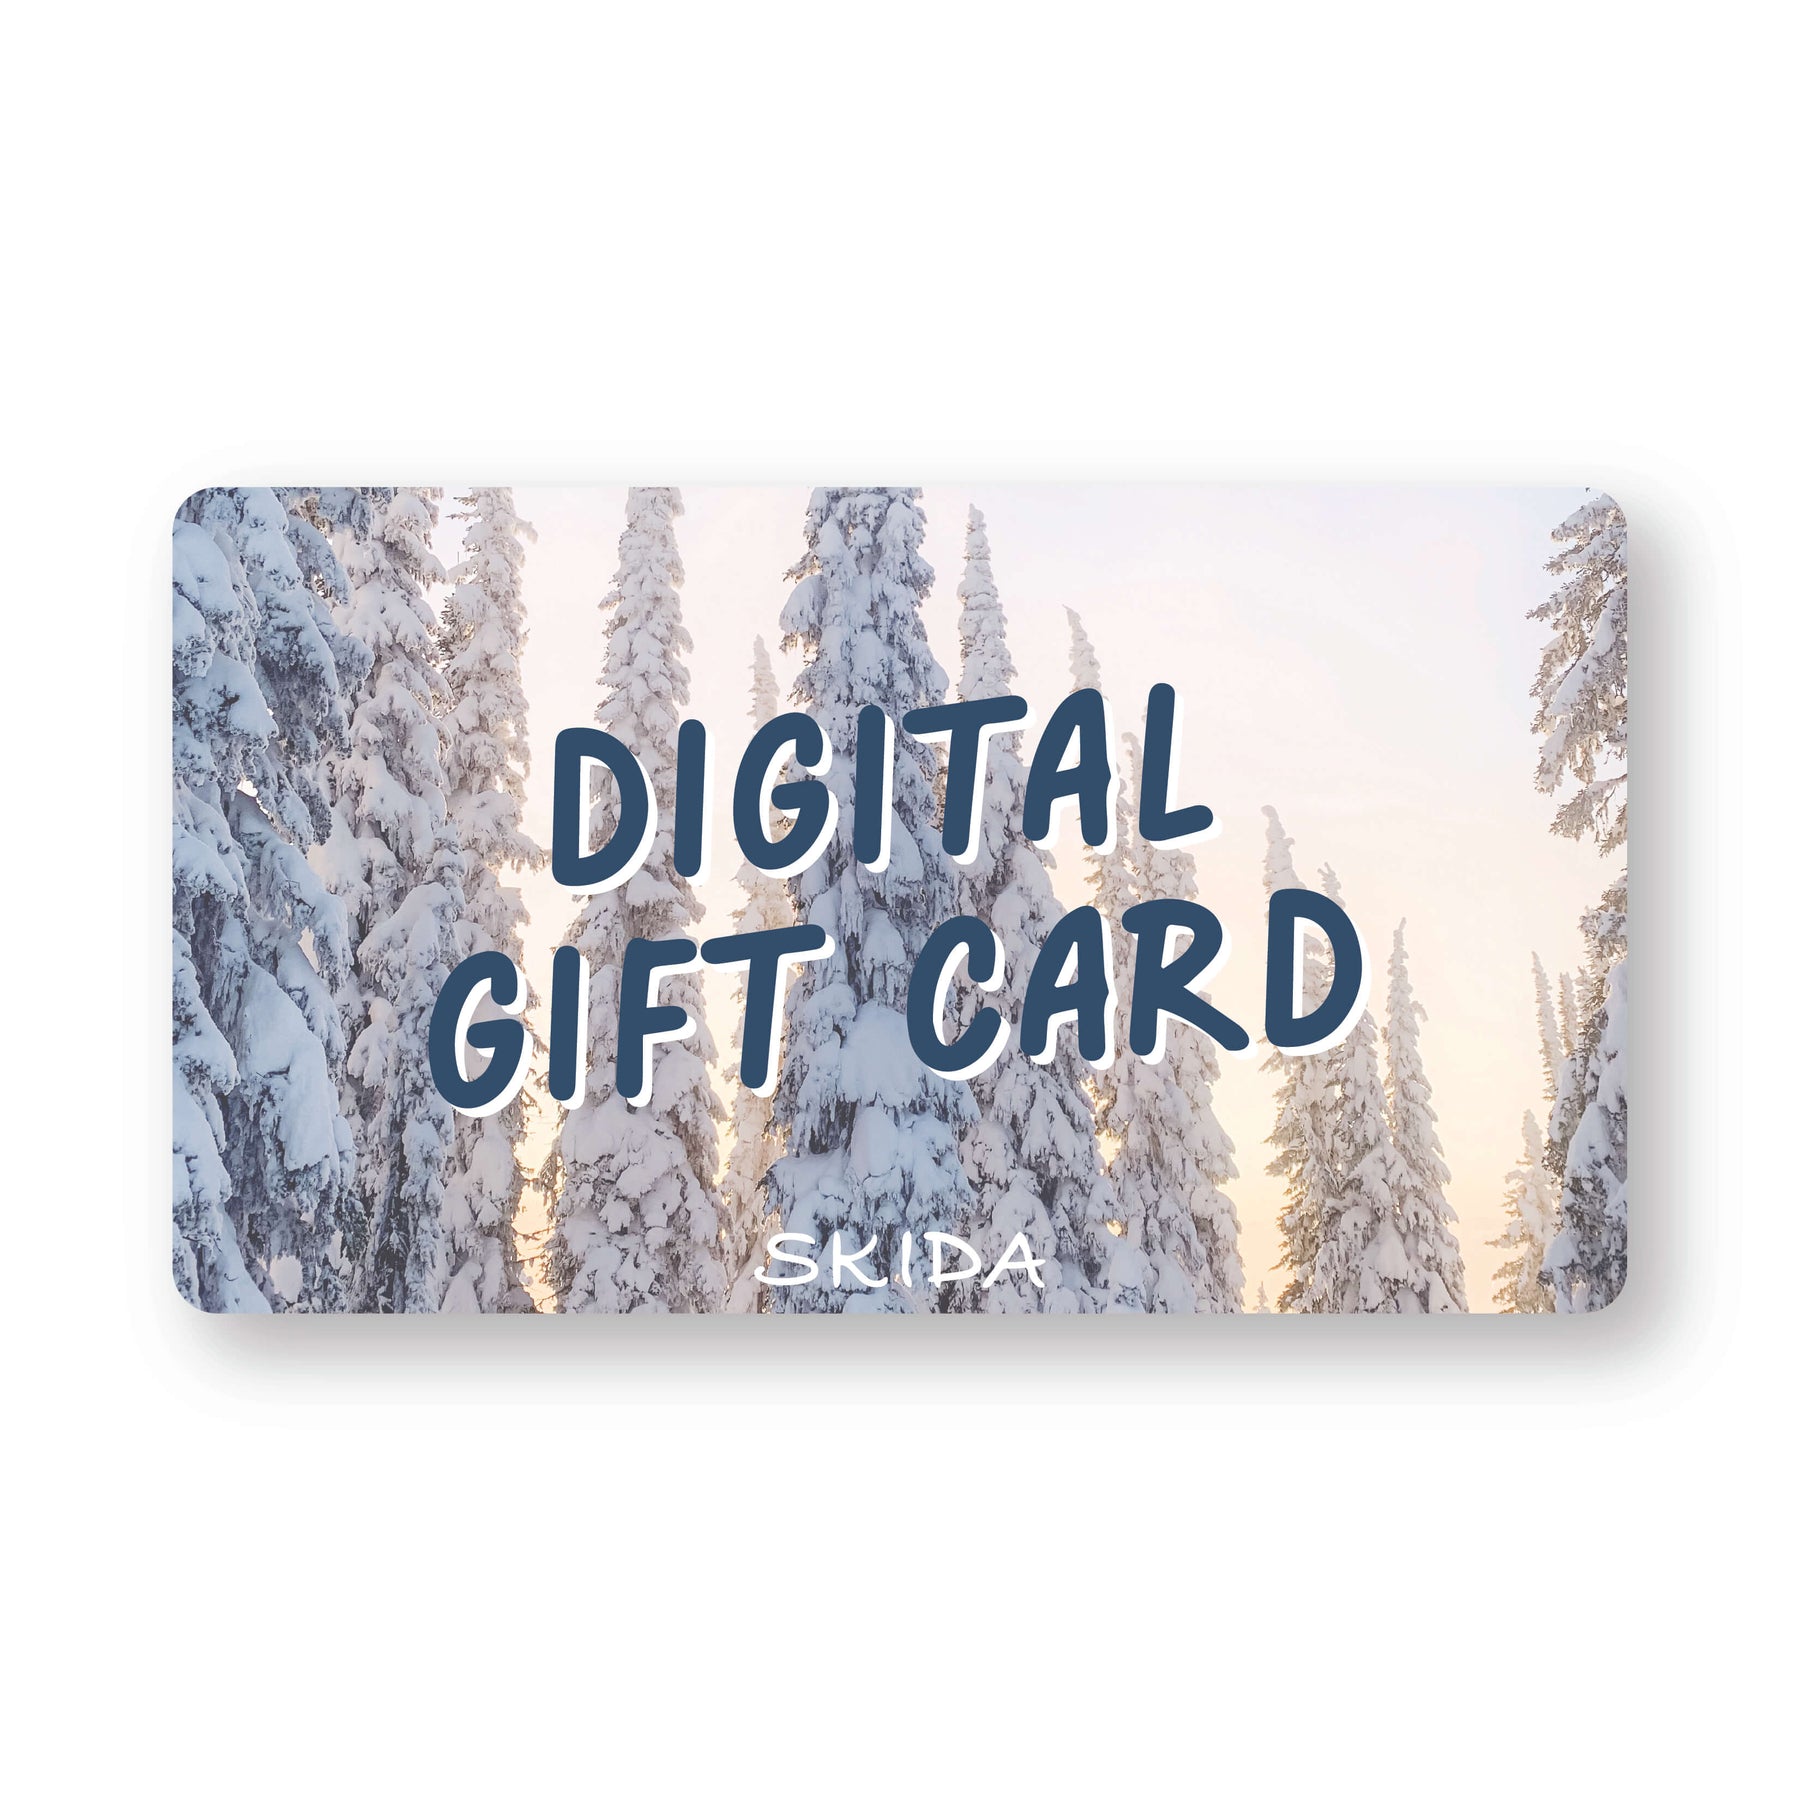 Digital Gift Card, Perfect for Gifts